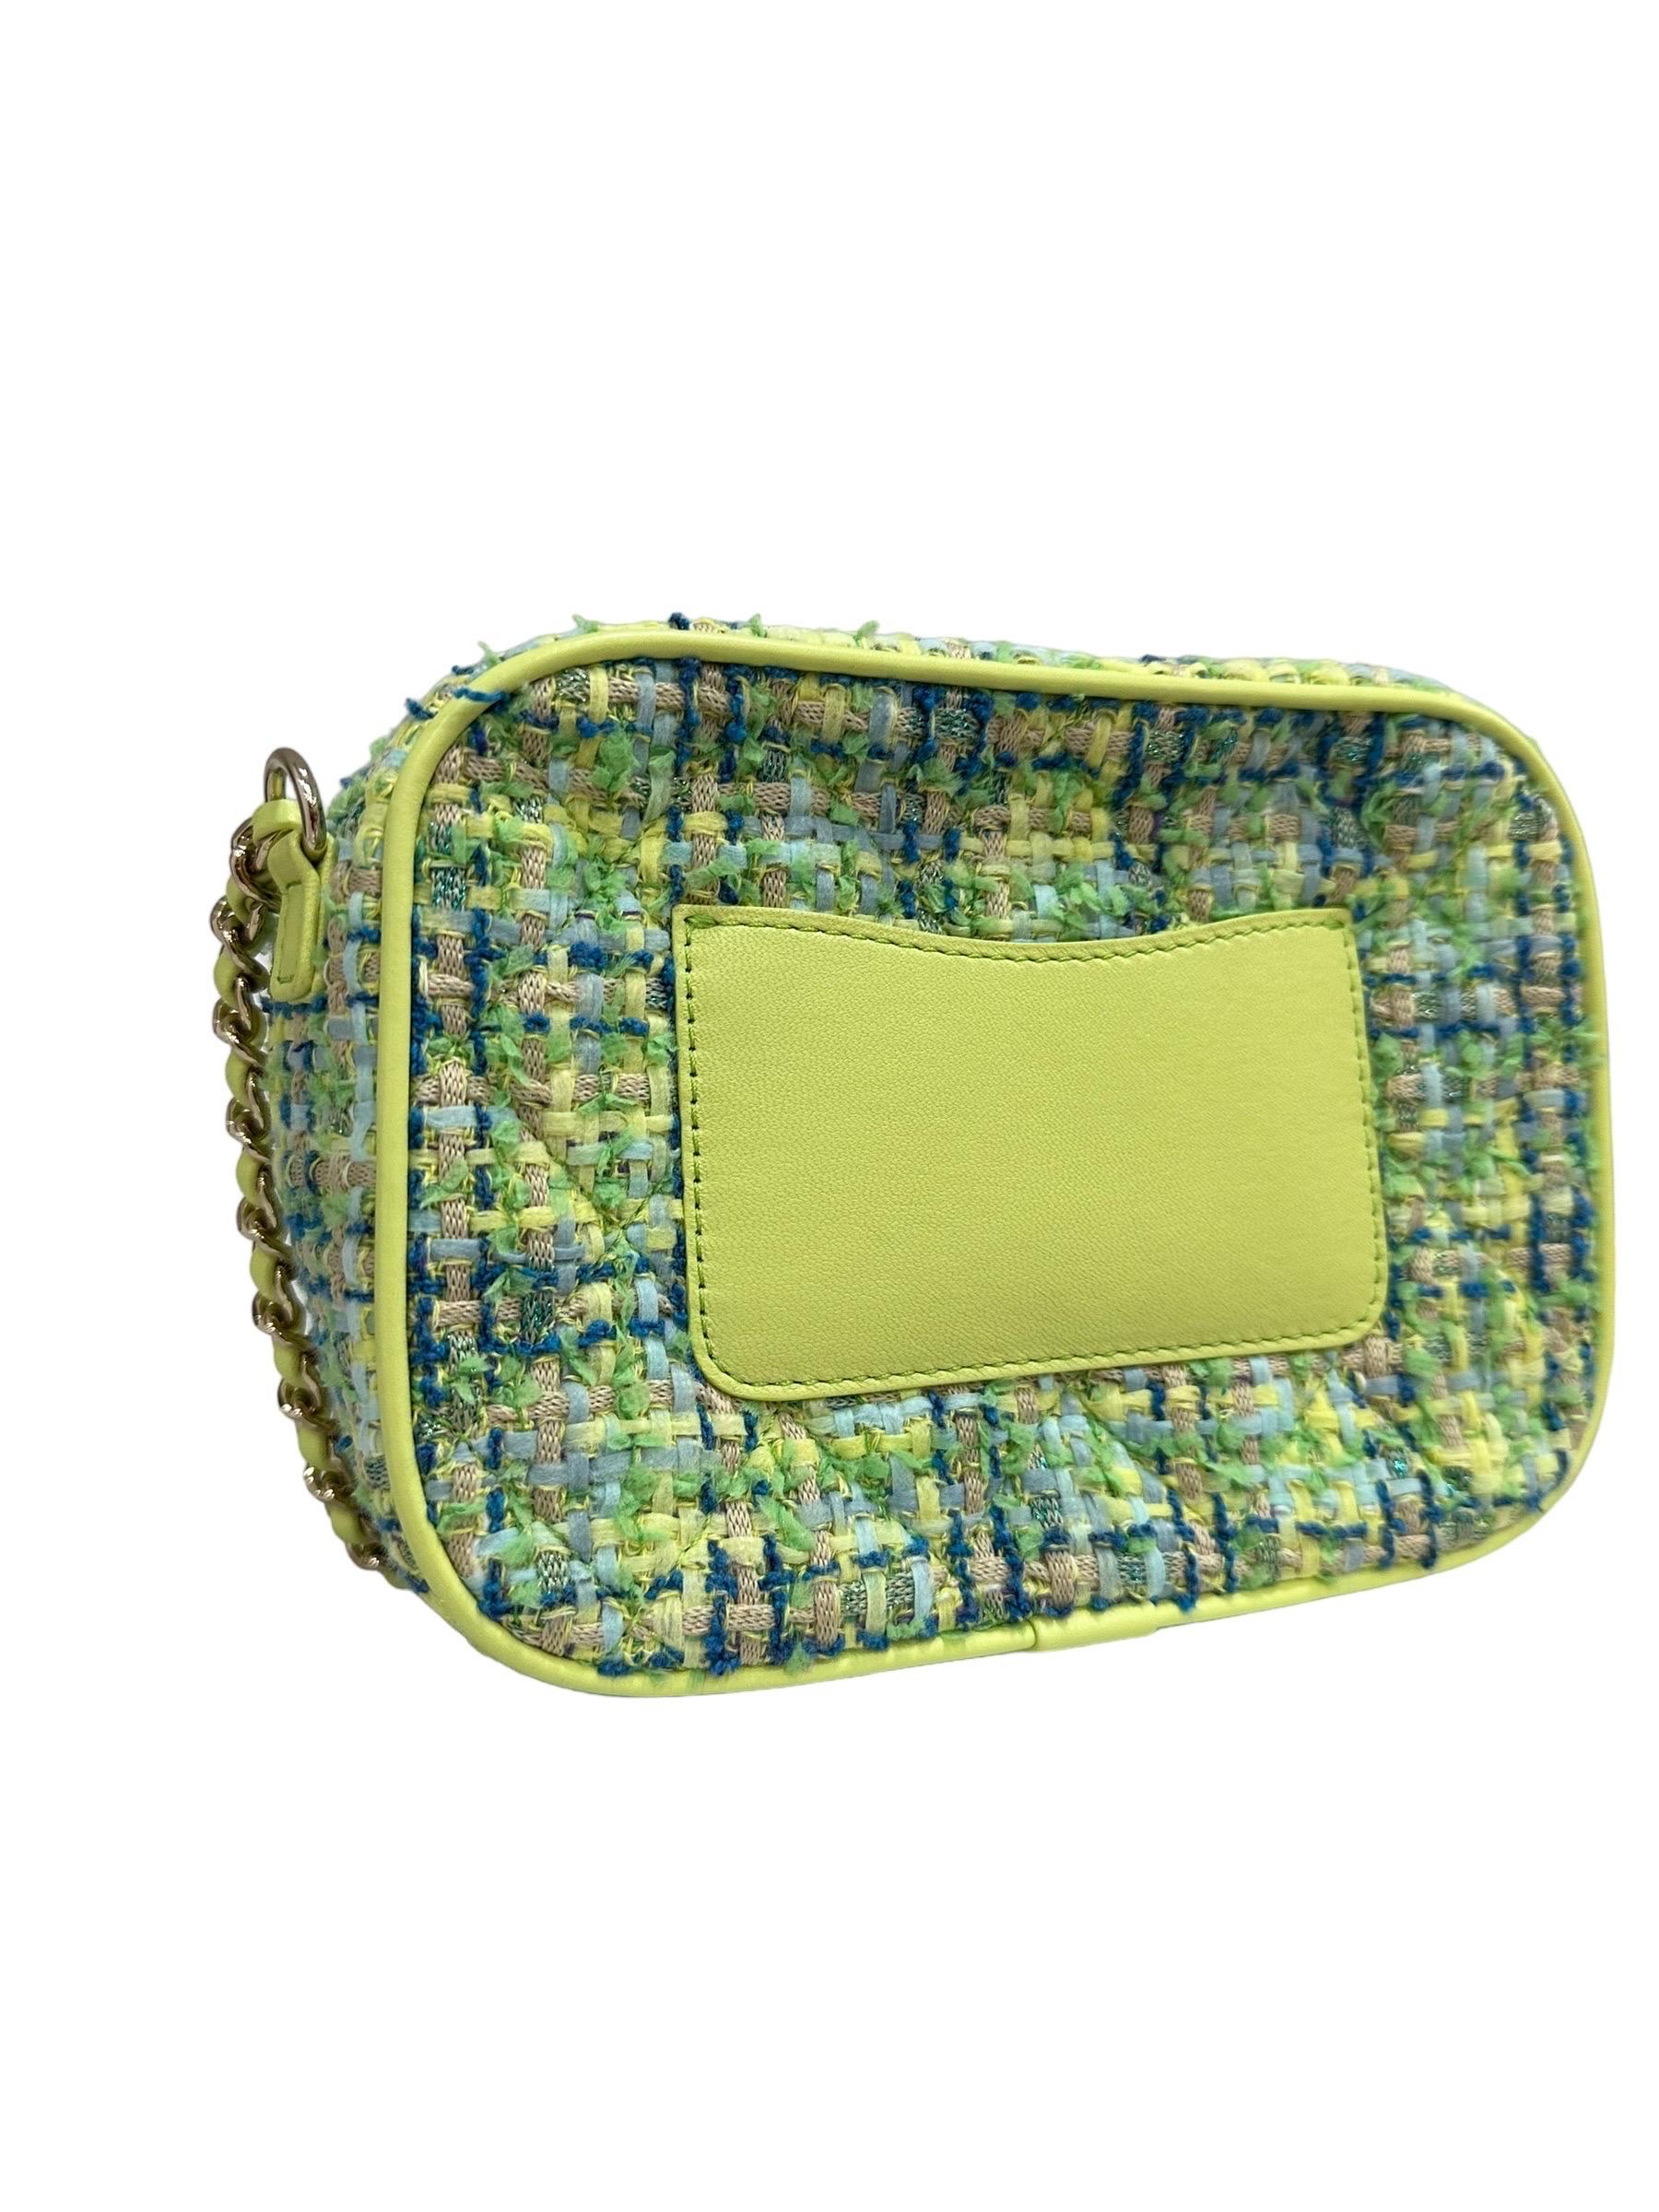 Borsa A Tracolla Chanel Camera Bag Tweed Lime 2019 For Sale 4